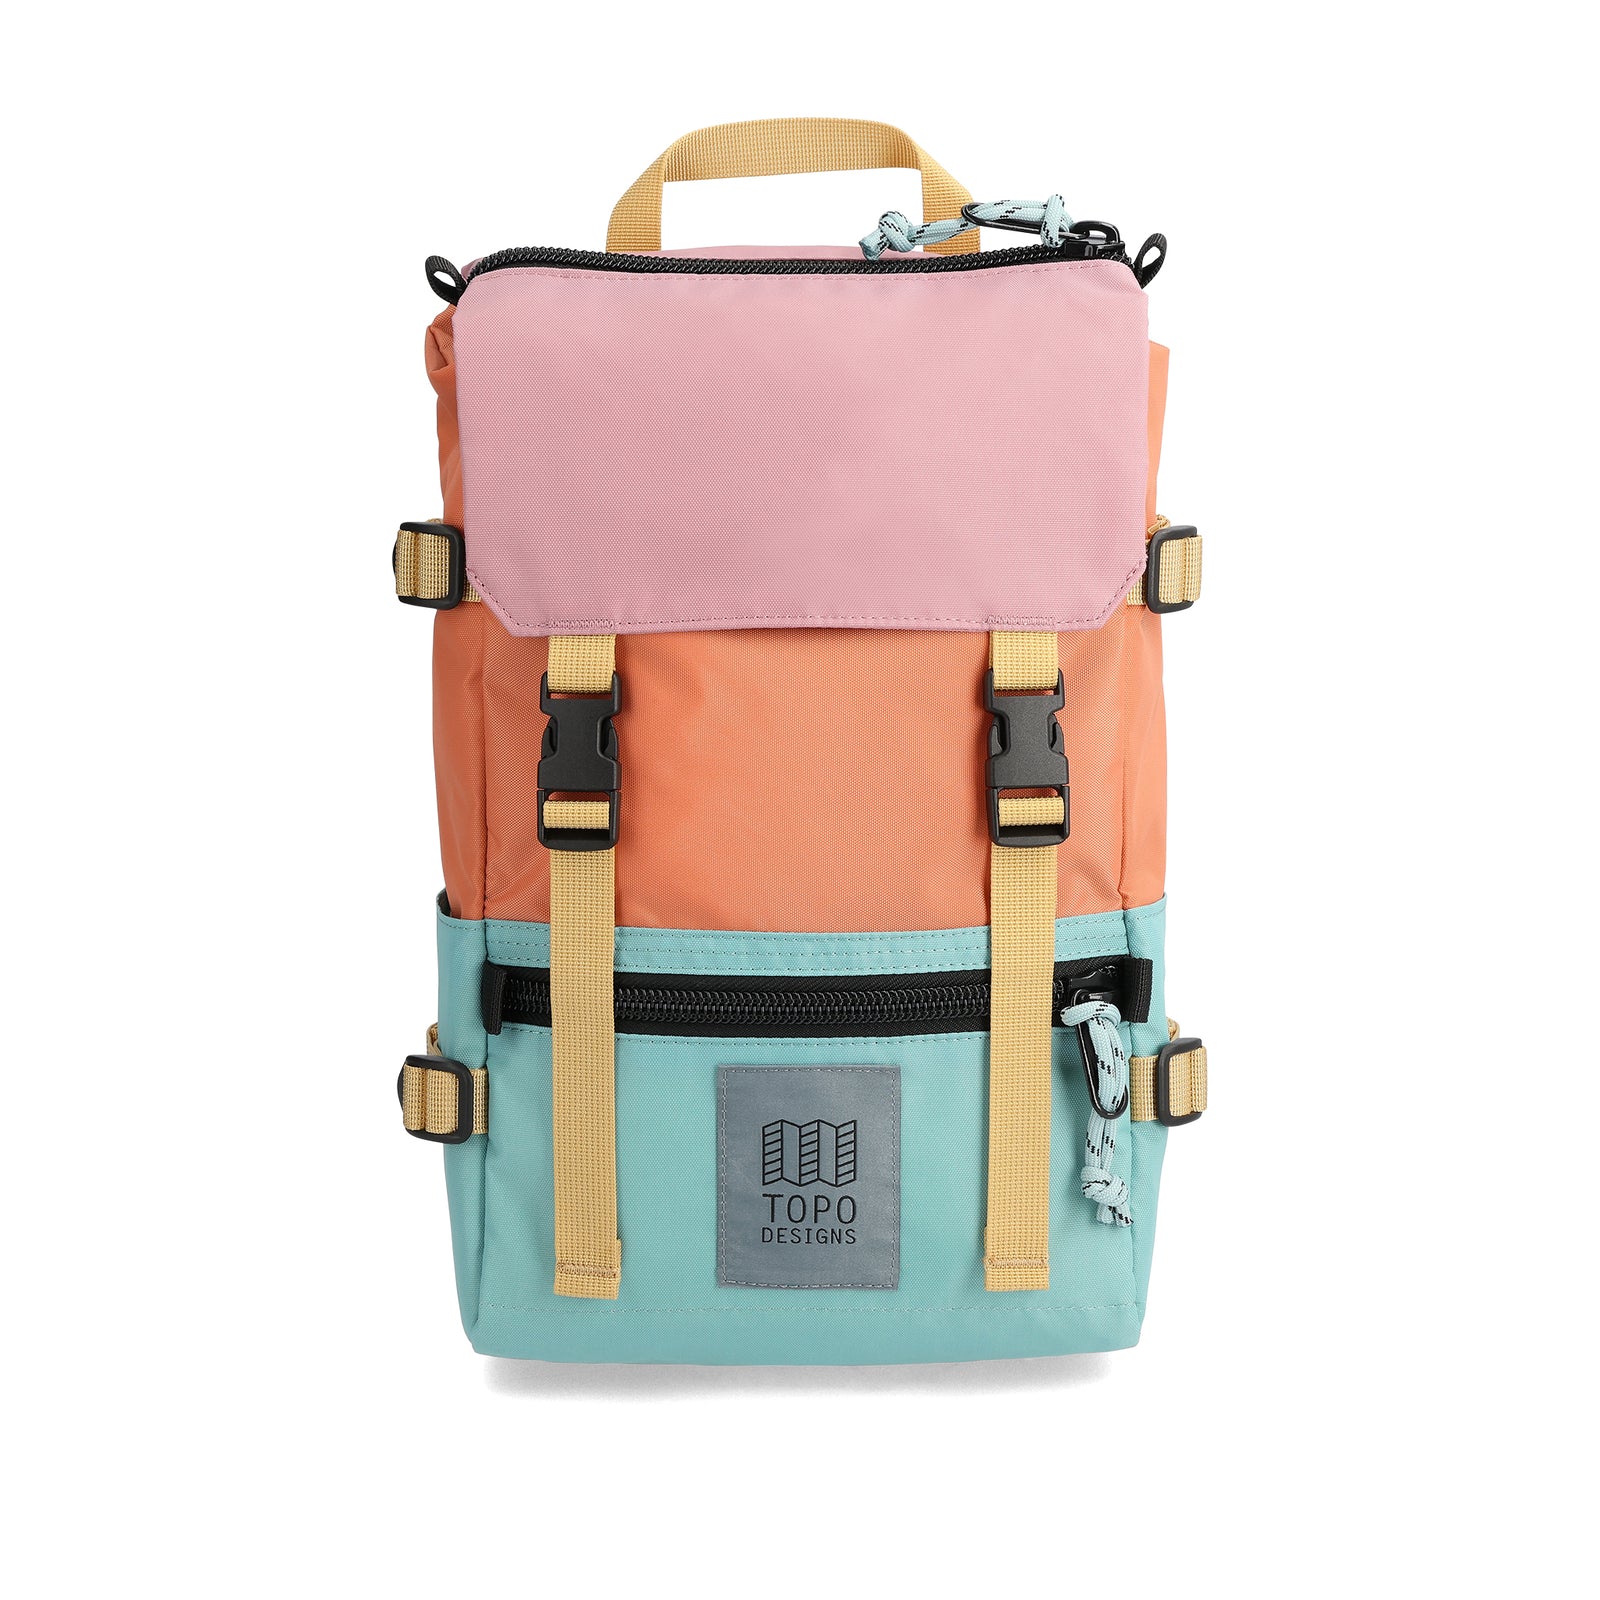 Front View of Topo Designs Rover Pack Mini in "Rose / Geode Green"